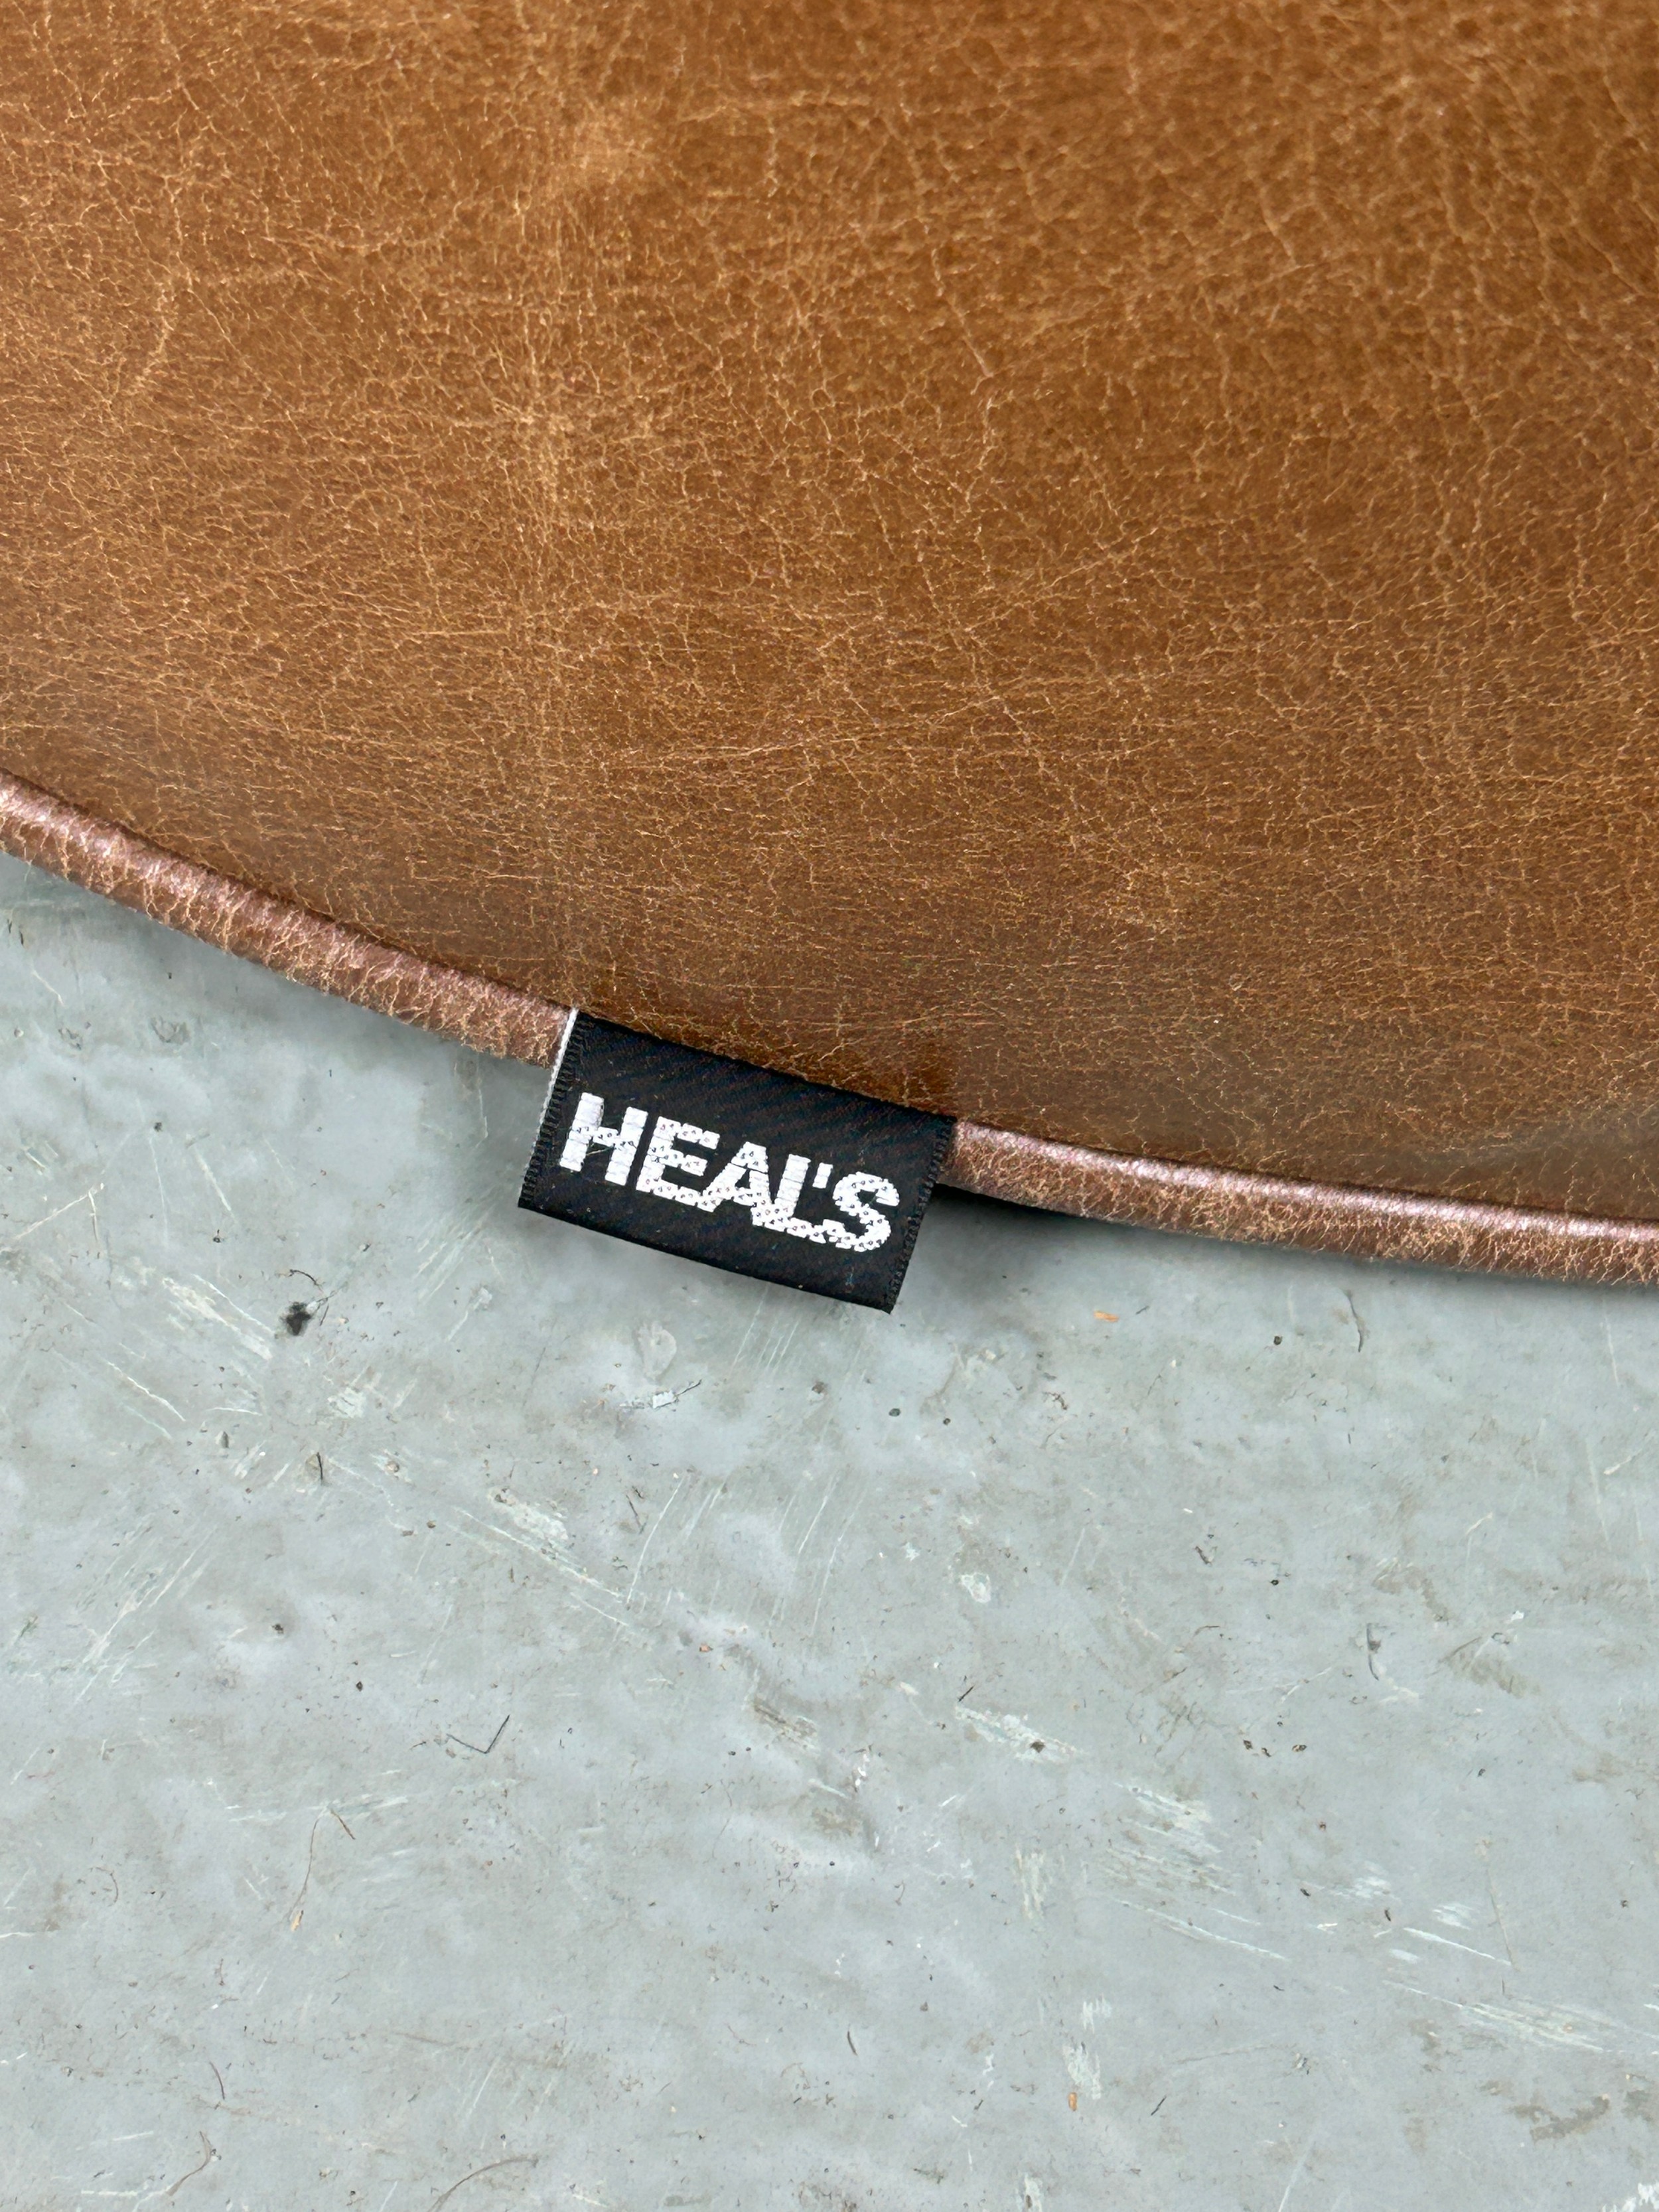 A PAIR OF HEALS CIRCULAR STOOLS OR POUFFES UPHOLSTERED IN TAN LEATHER, 60cm x 35cm each. - Image 3 of 3